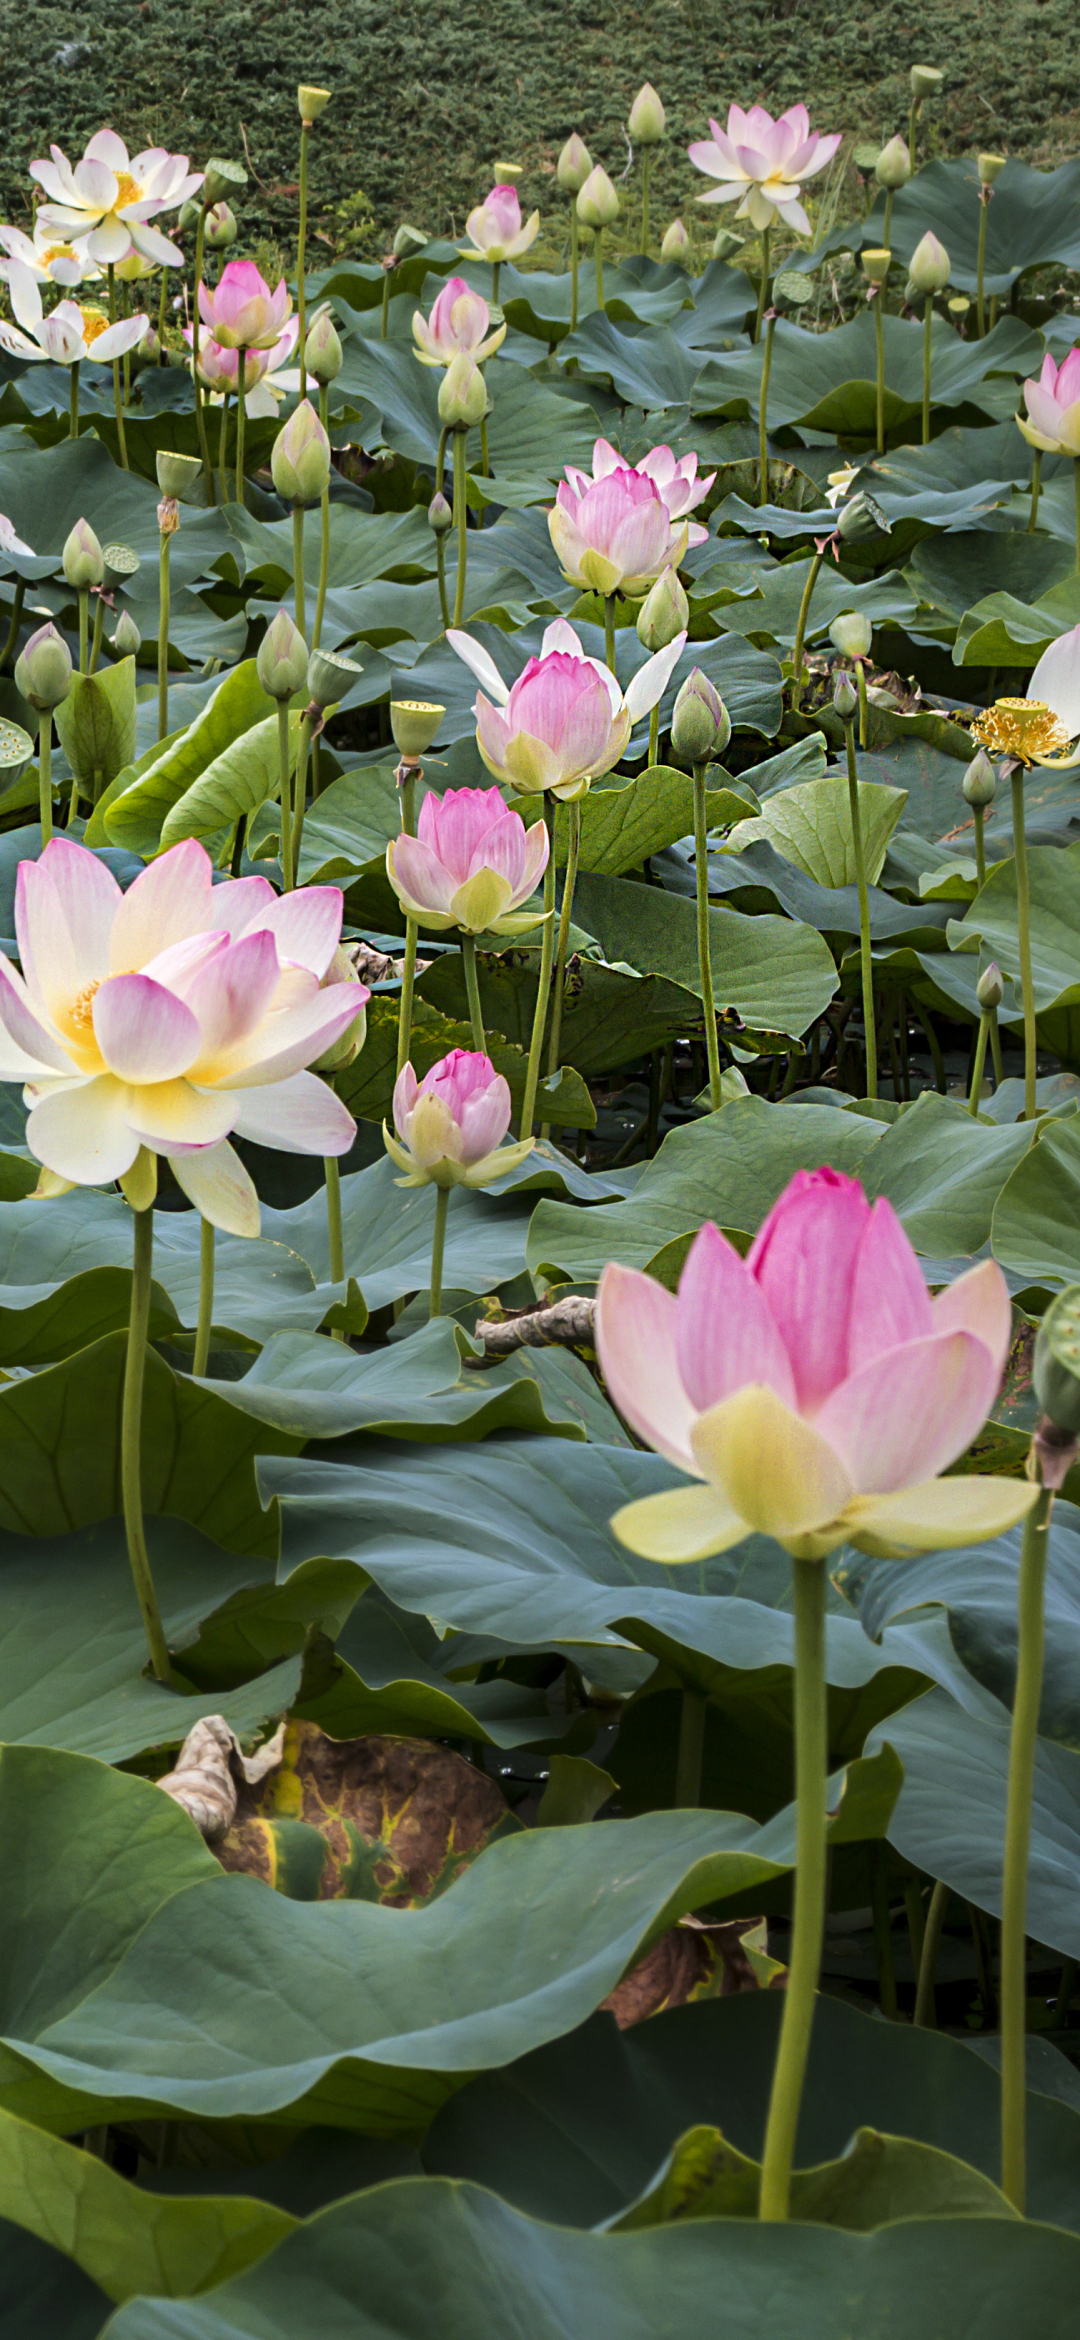 Lotus Flowers and Water Lilies